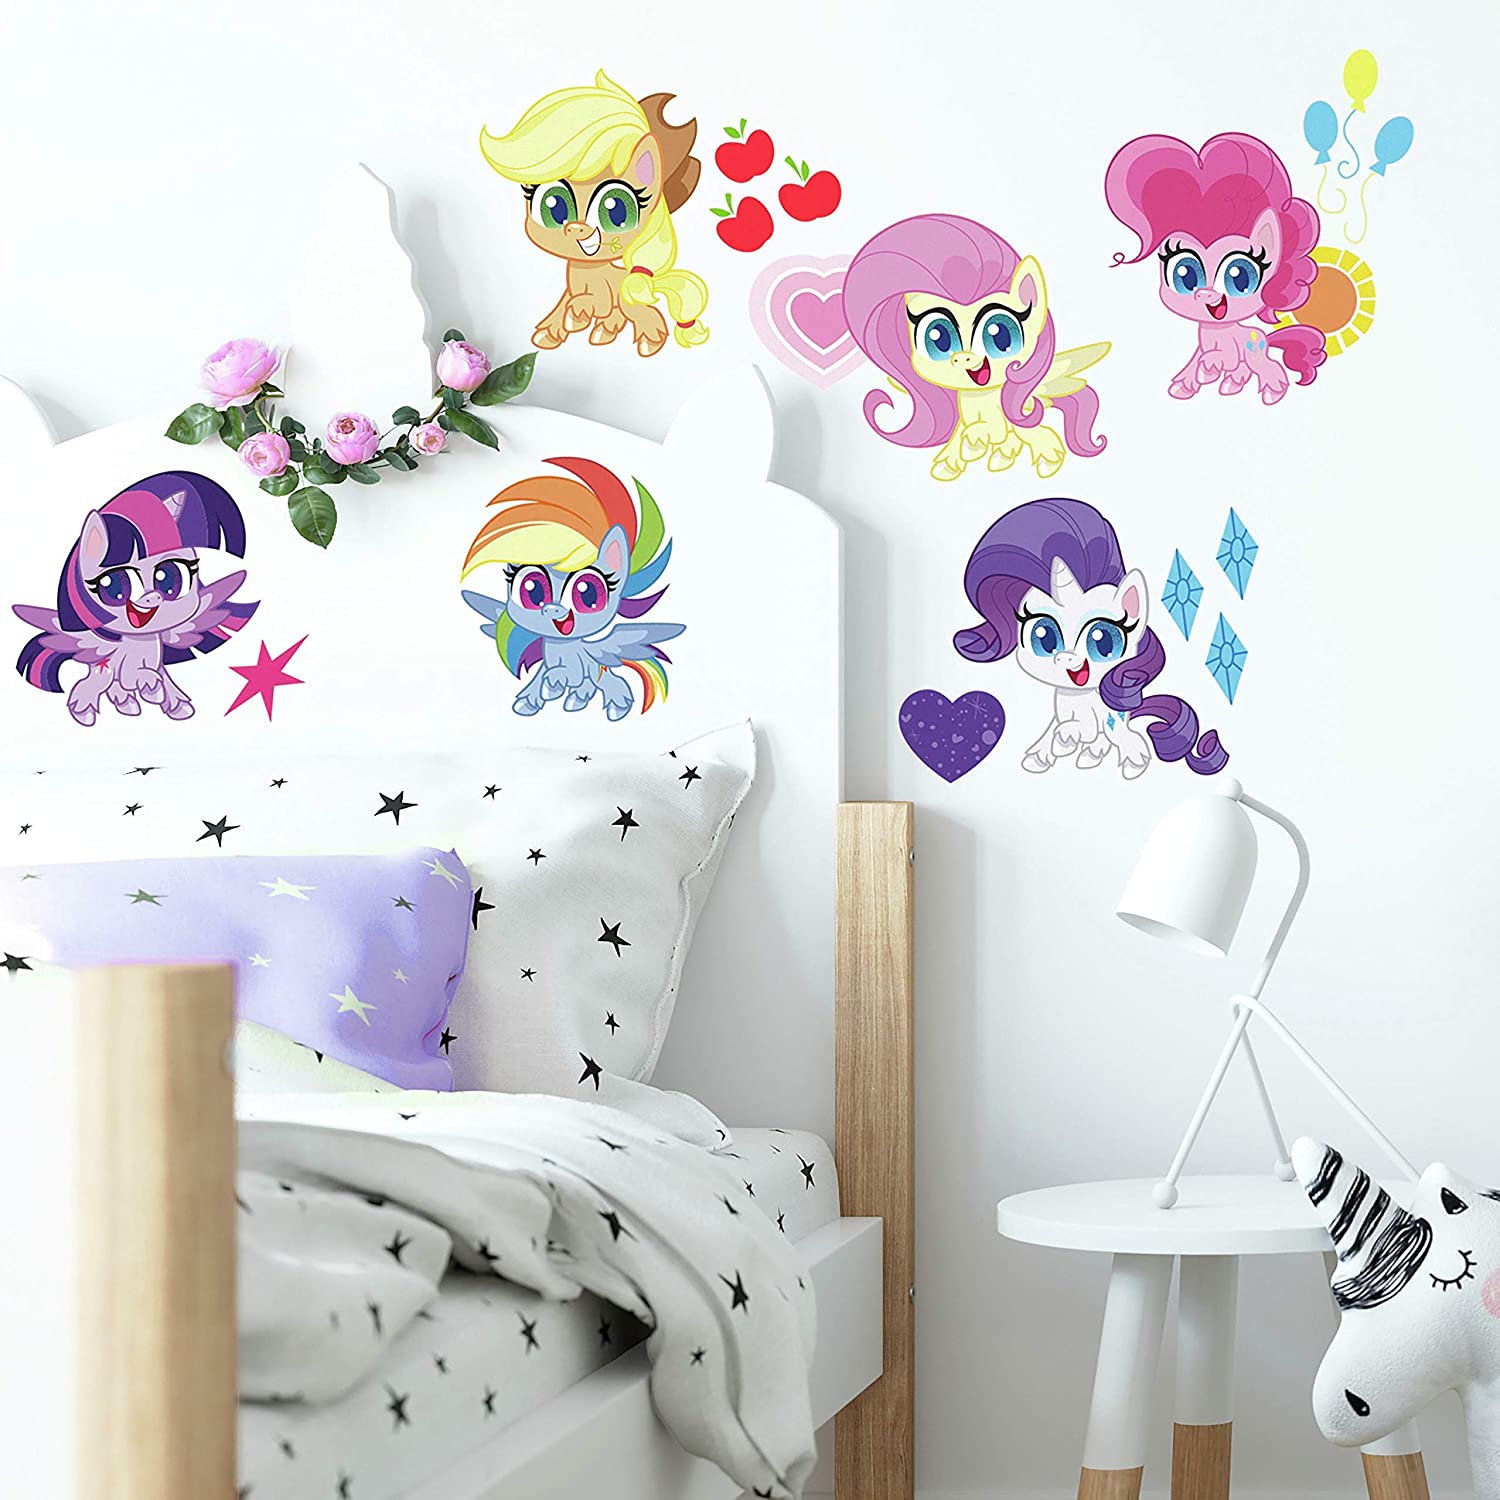 MLP: PL Let's Get Magical Peel and Stick Wall Decal Set 2